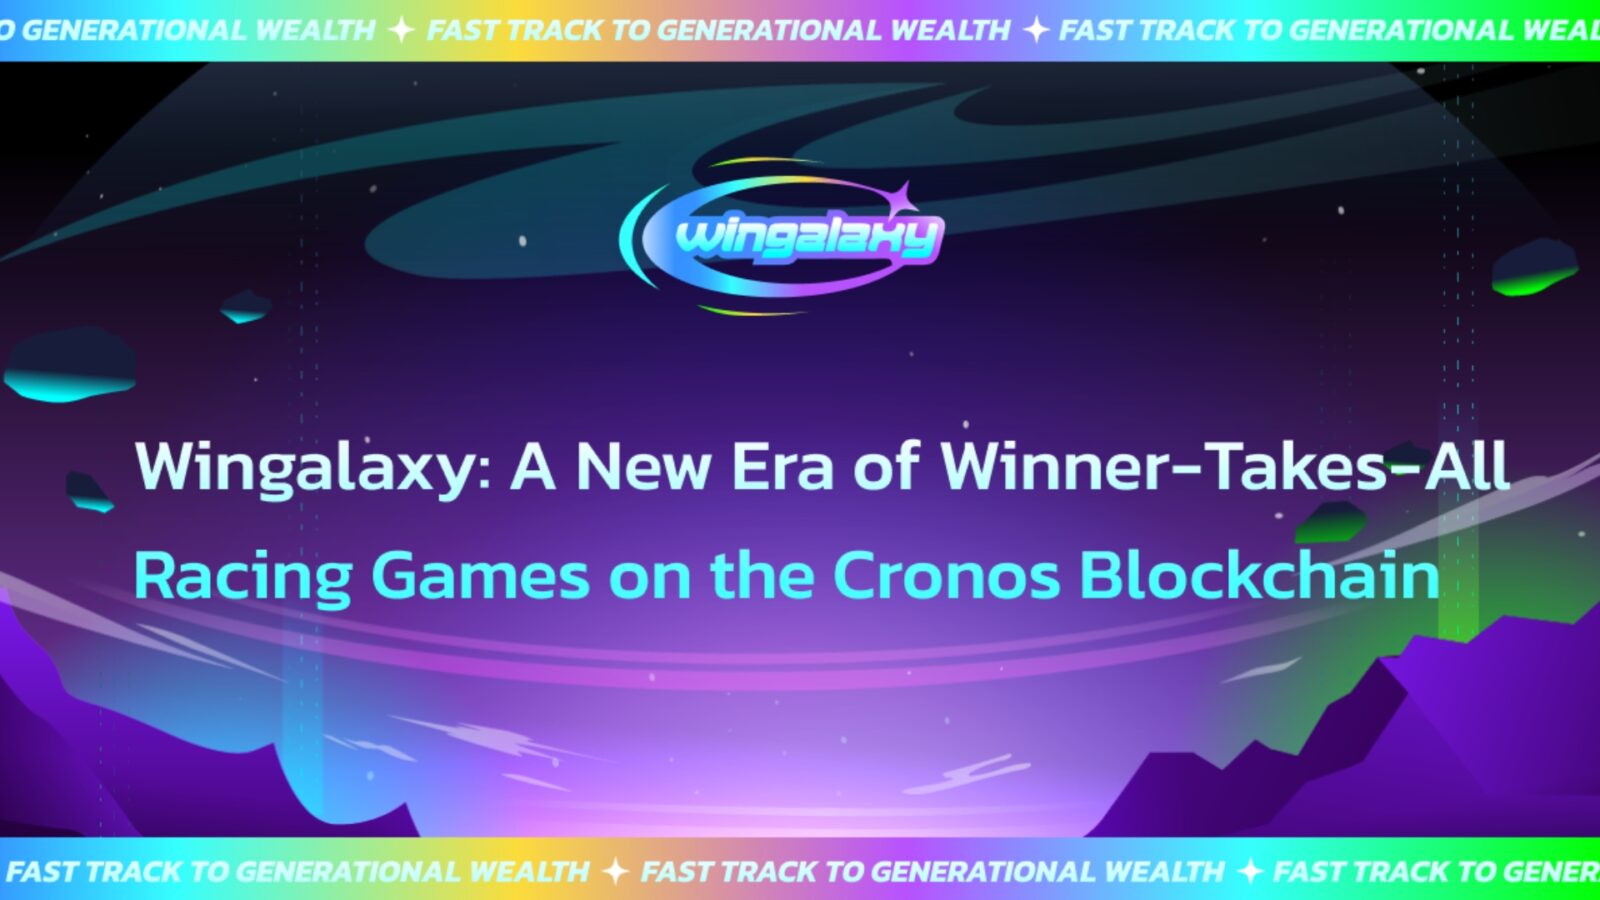 Wingalaxy Launches First Blockchain Racing Game on Cronos